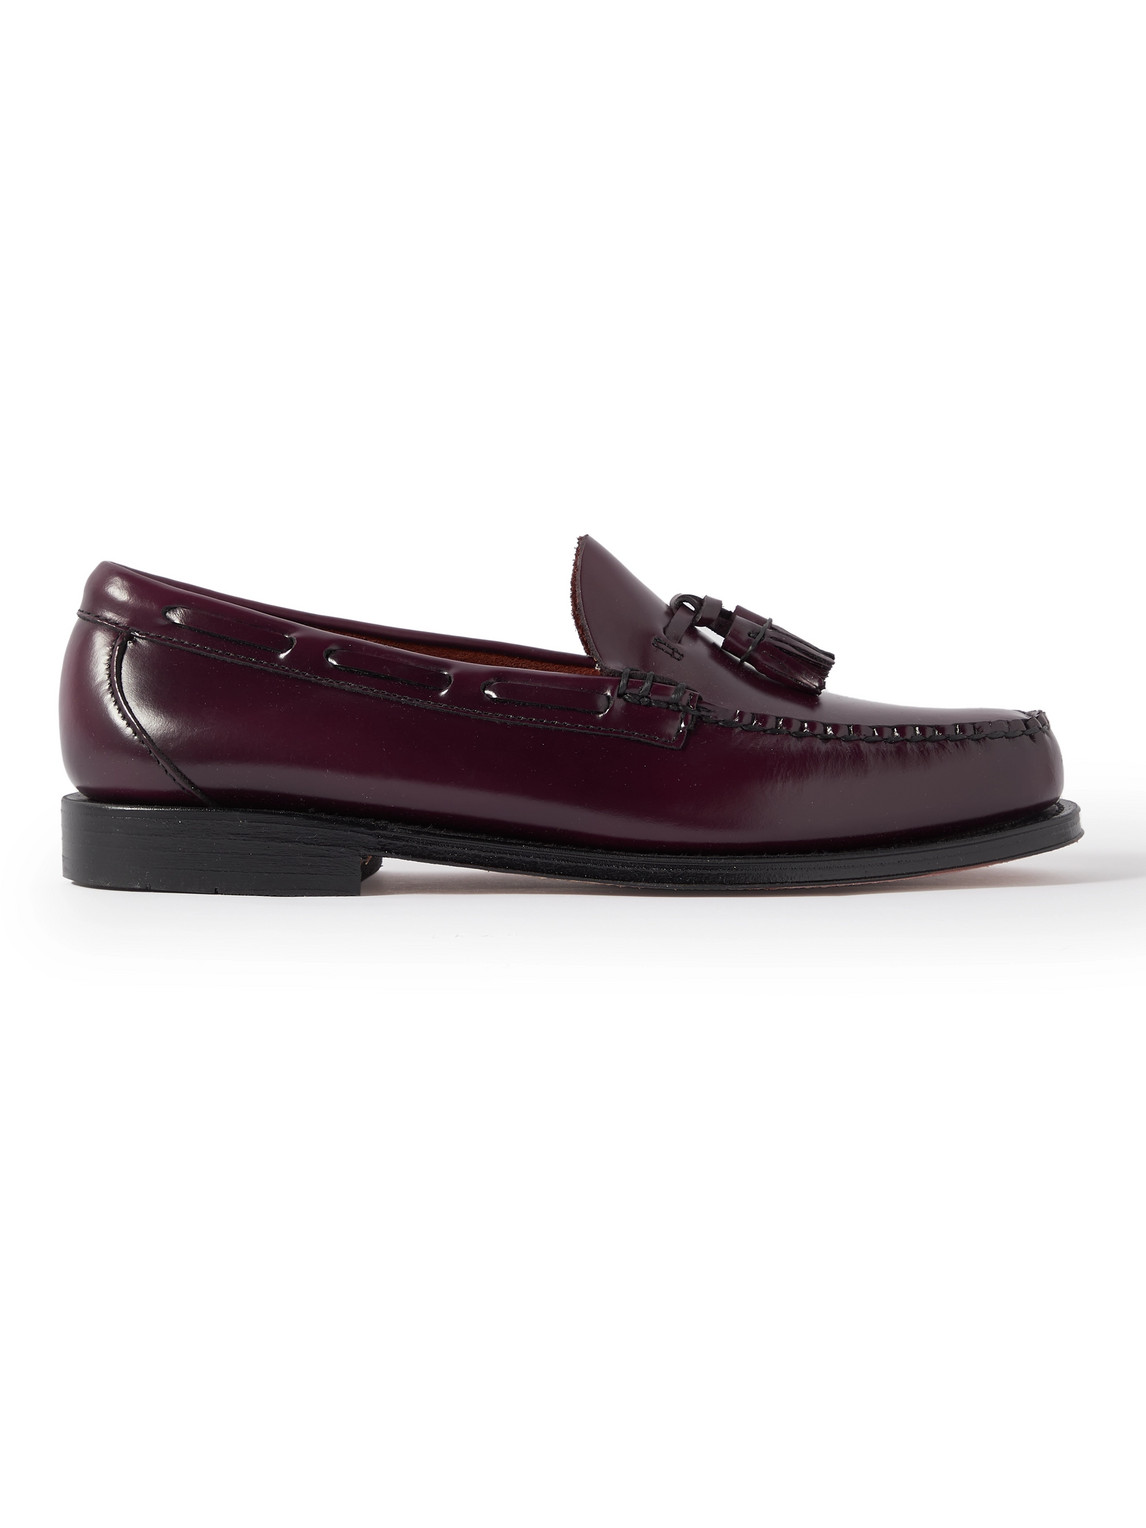 G.h. Bass & Co. Weejuns Heritage Larkin Glossed-leather Tasselled Loafers In Burgundy